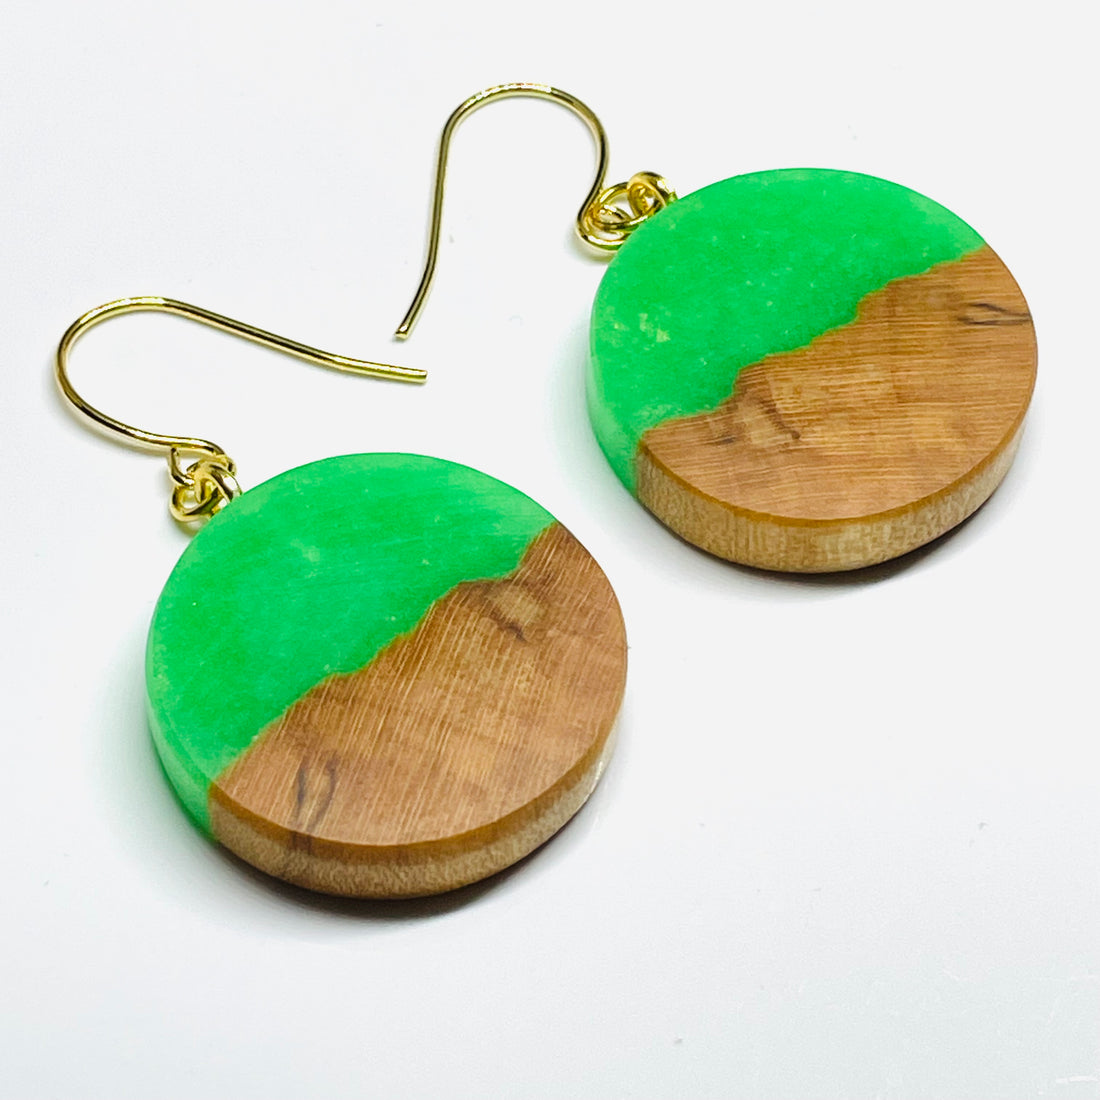 handmade jewelry, Minnesota local wood and resin artist. Green Glow-In-The-Dark resin with a maple wood, nickel free dangle earrings circle shaped